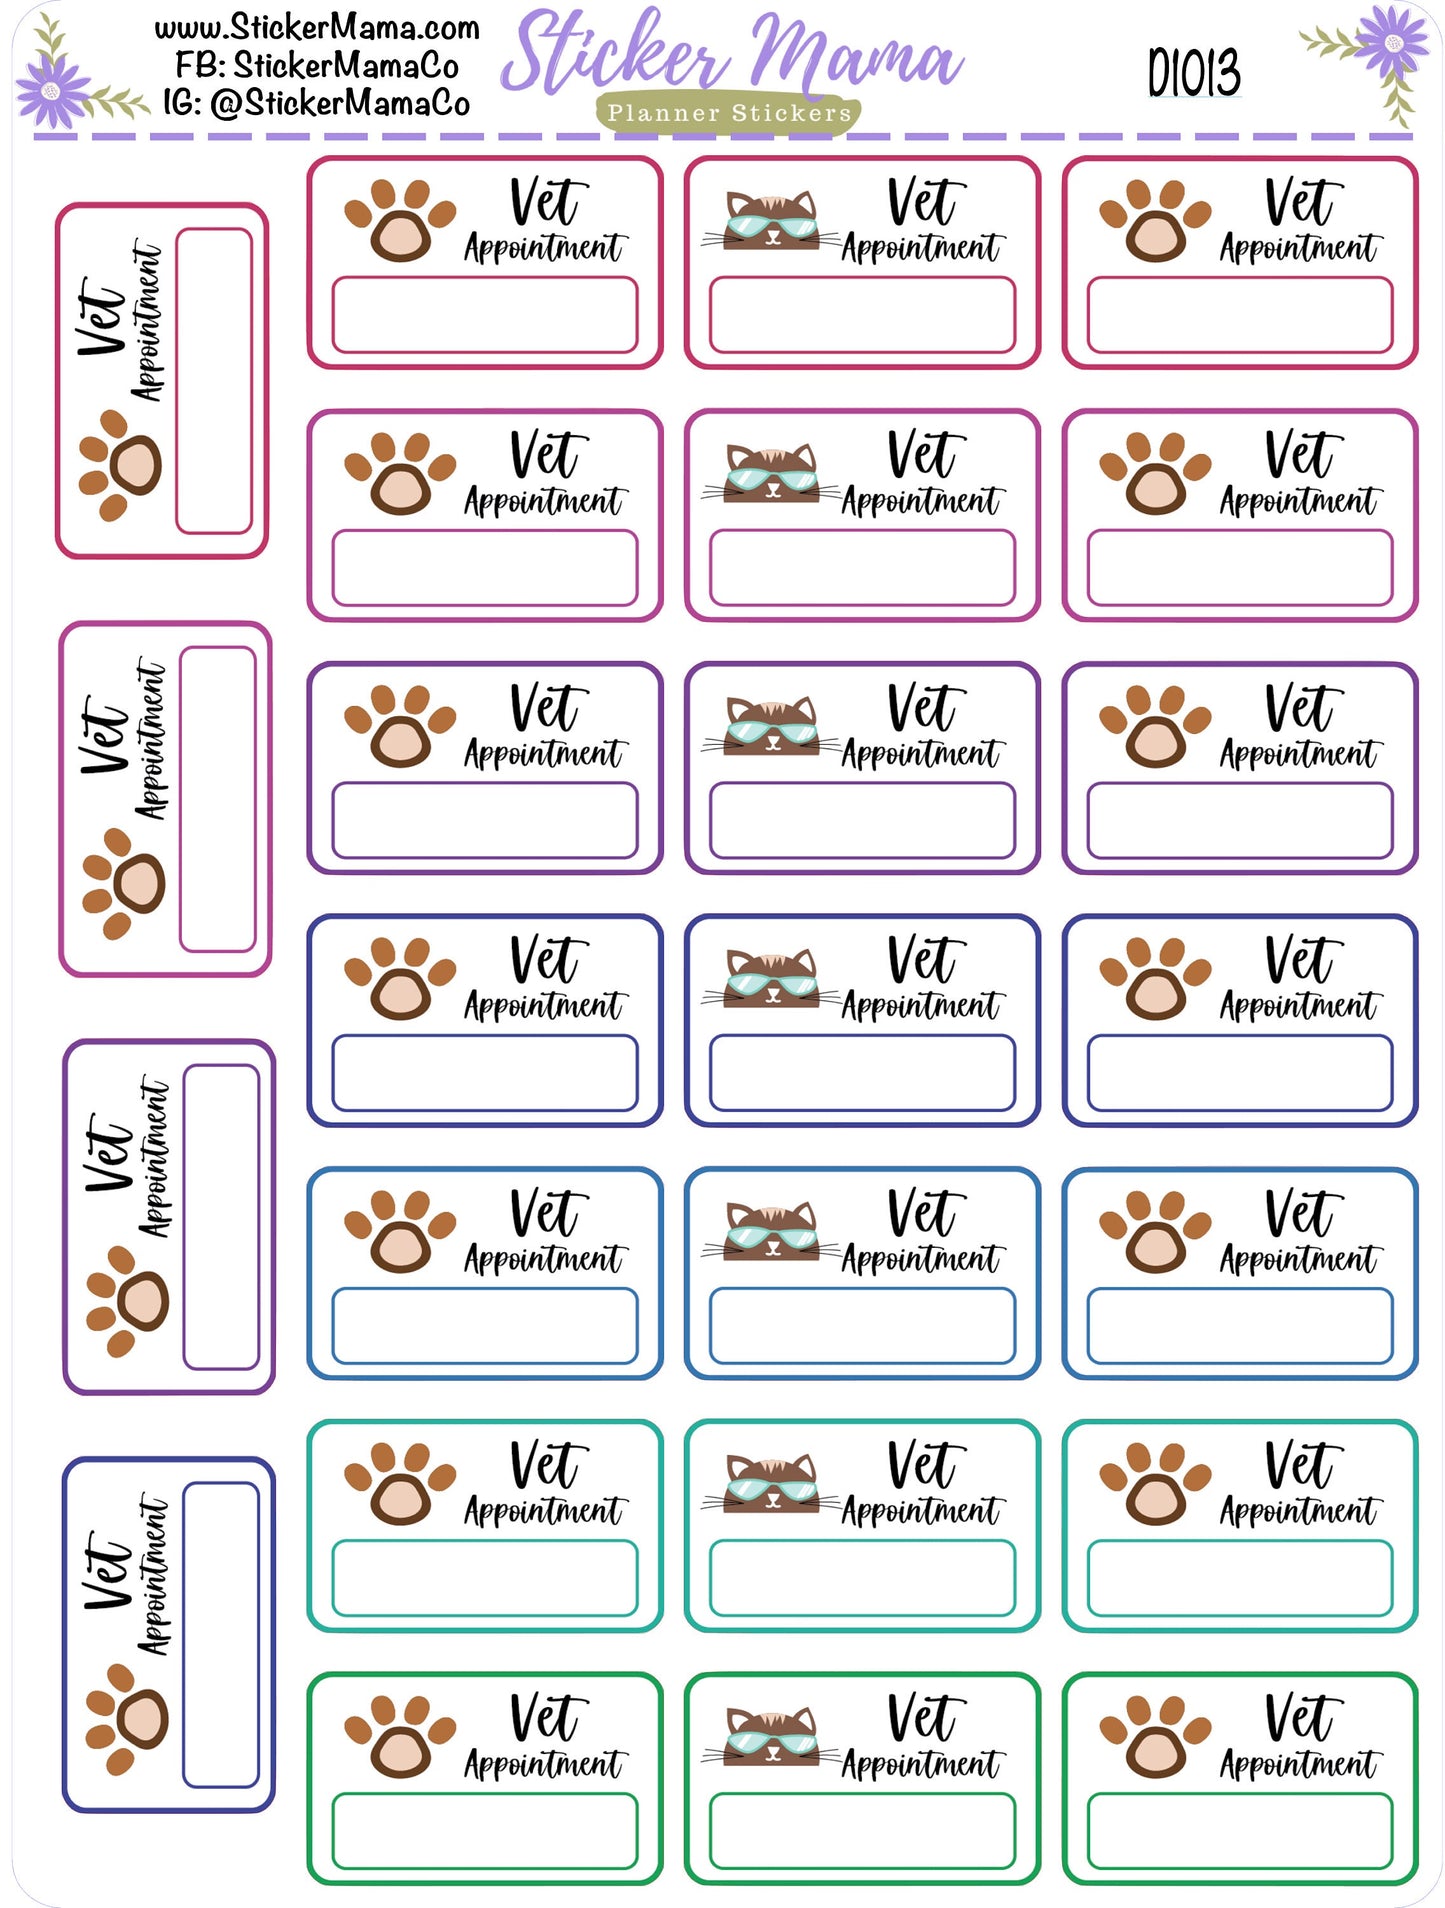 D1013 - PET APPOINTMENT STICKERS - Planner Stickers - Pet Stickers for Planners